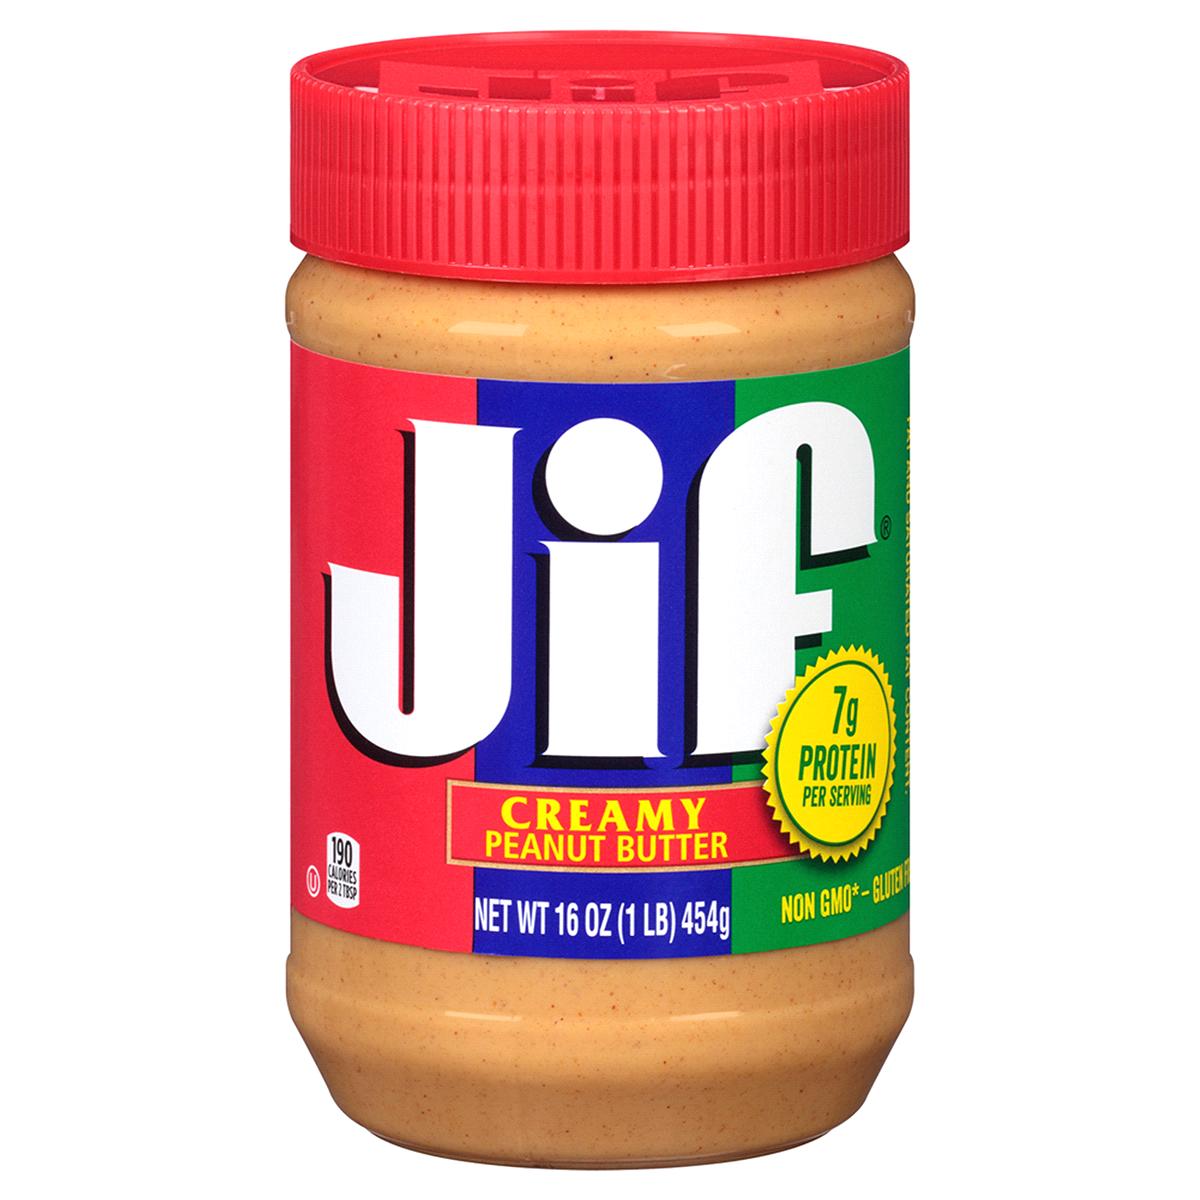 Jif Peanut Butter Product for Free